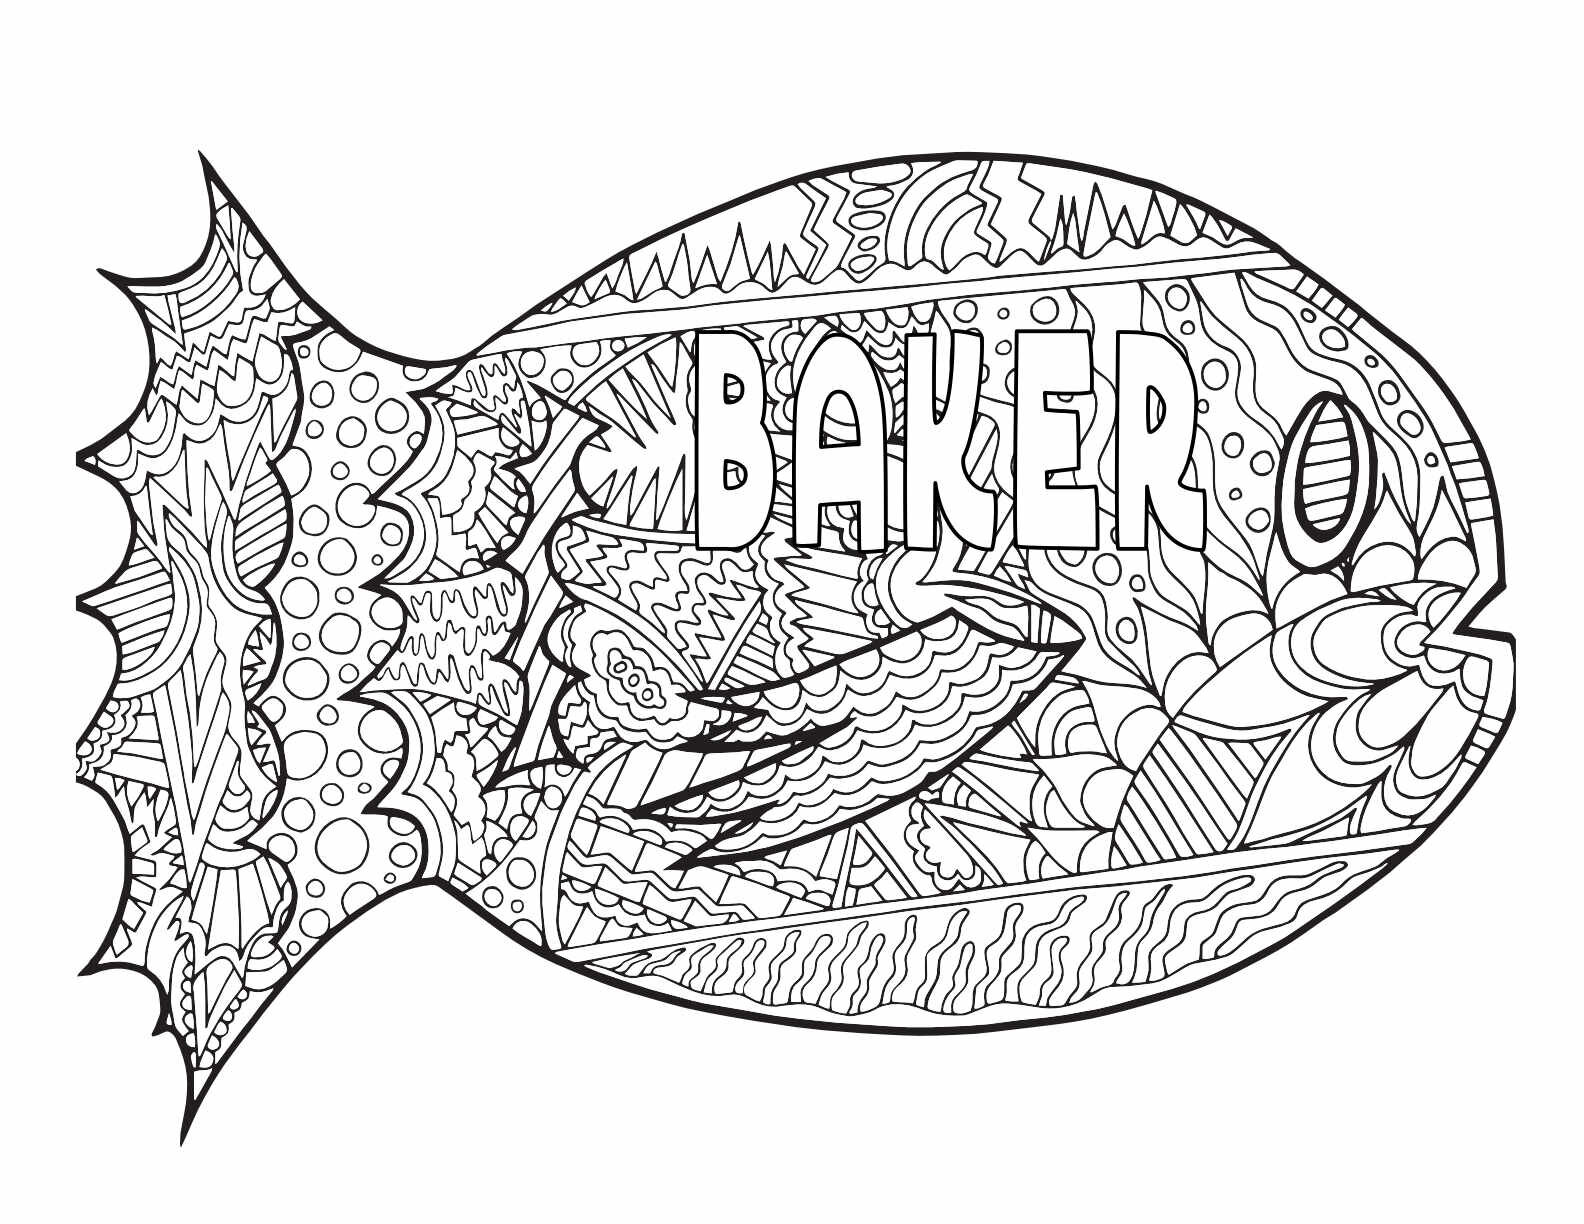 3 FREE BAKER PRINTABLE COLORING PAGES CLICK HERE TO DOWNLOAD THE PAGE ABOVE